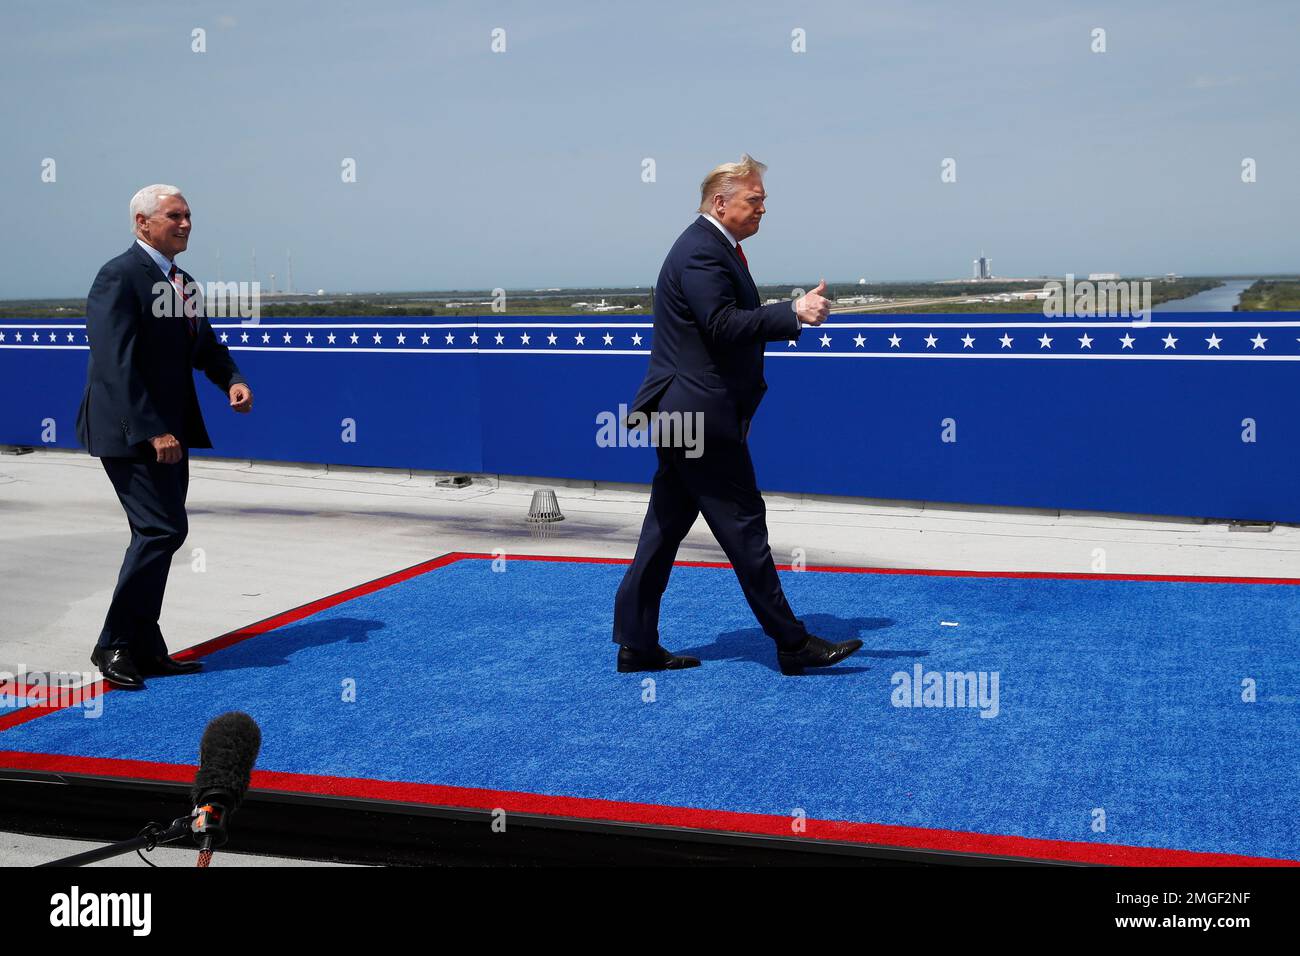 President Donald Trump and Vice President Mike Pence, walk on a platform as  a SpaceX Falcon 9, with NASA astronauts Doug Hurley and Bob Behnken in the  Crew Dragon capsule, sits on